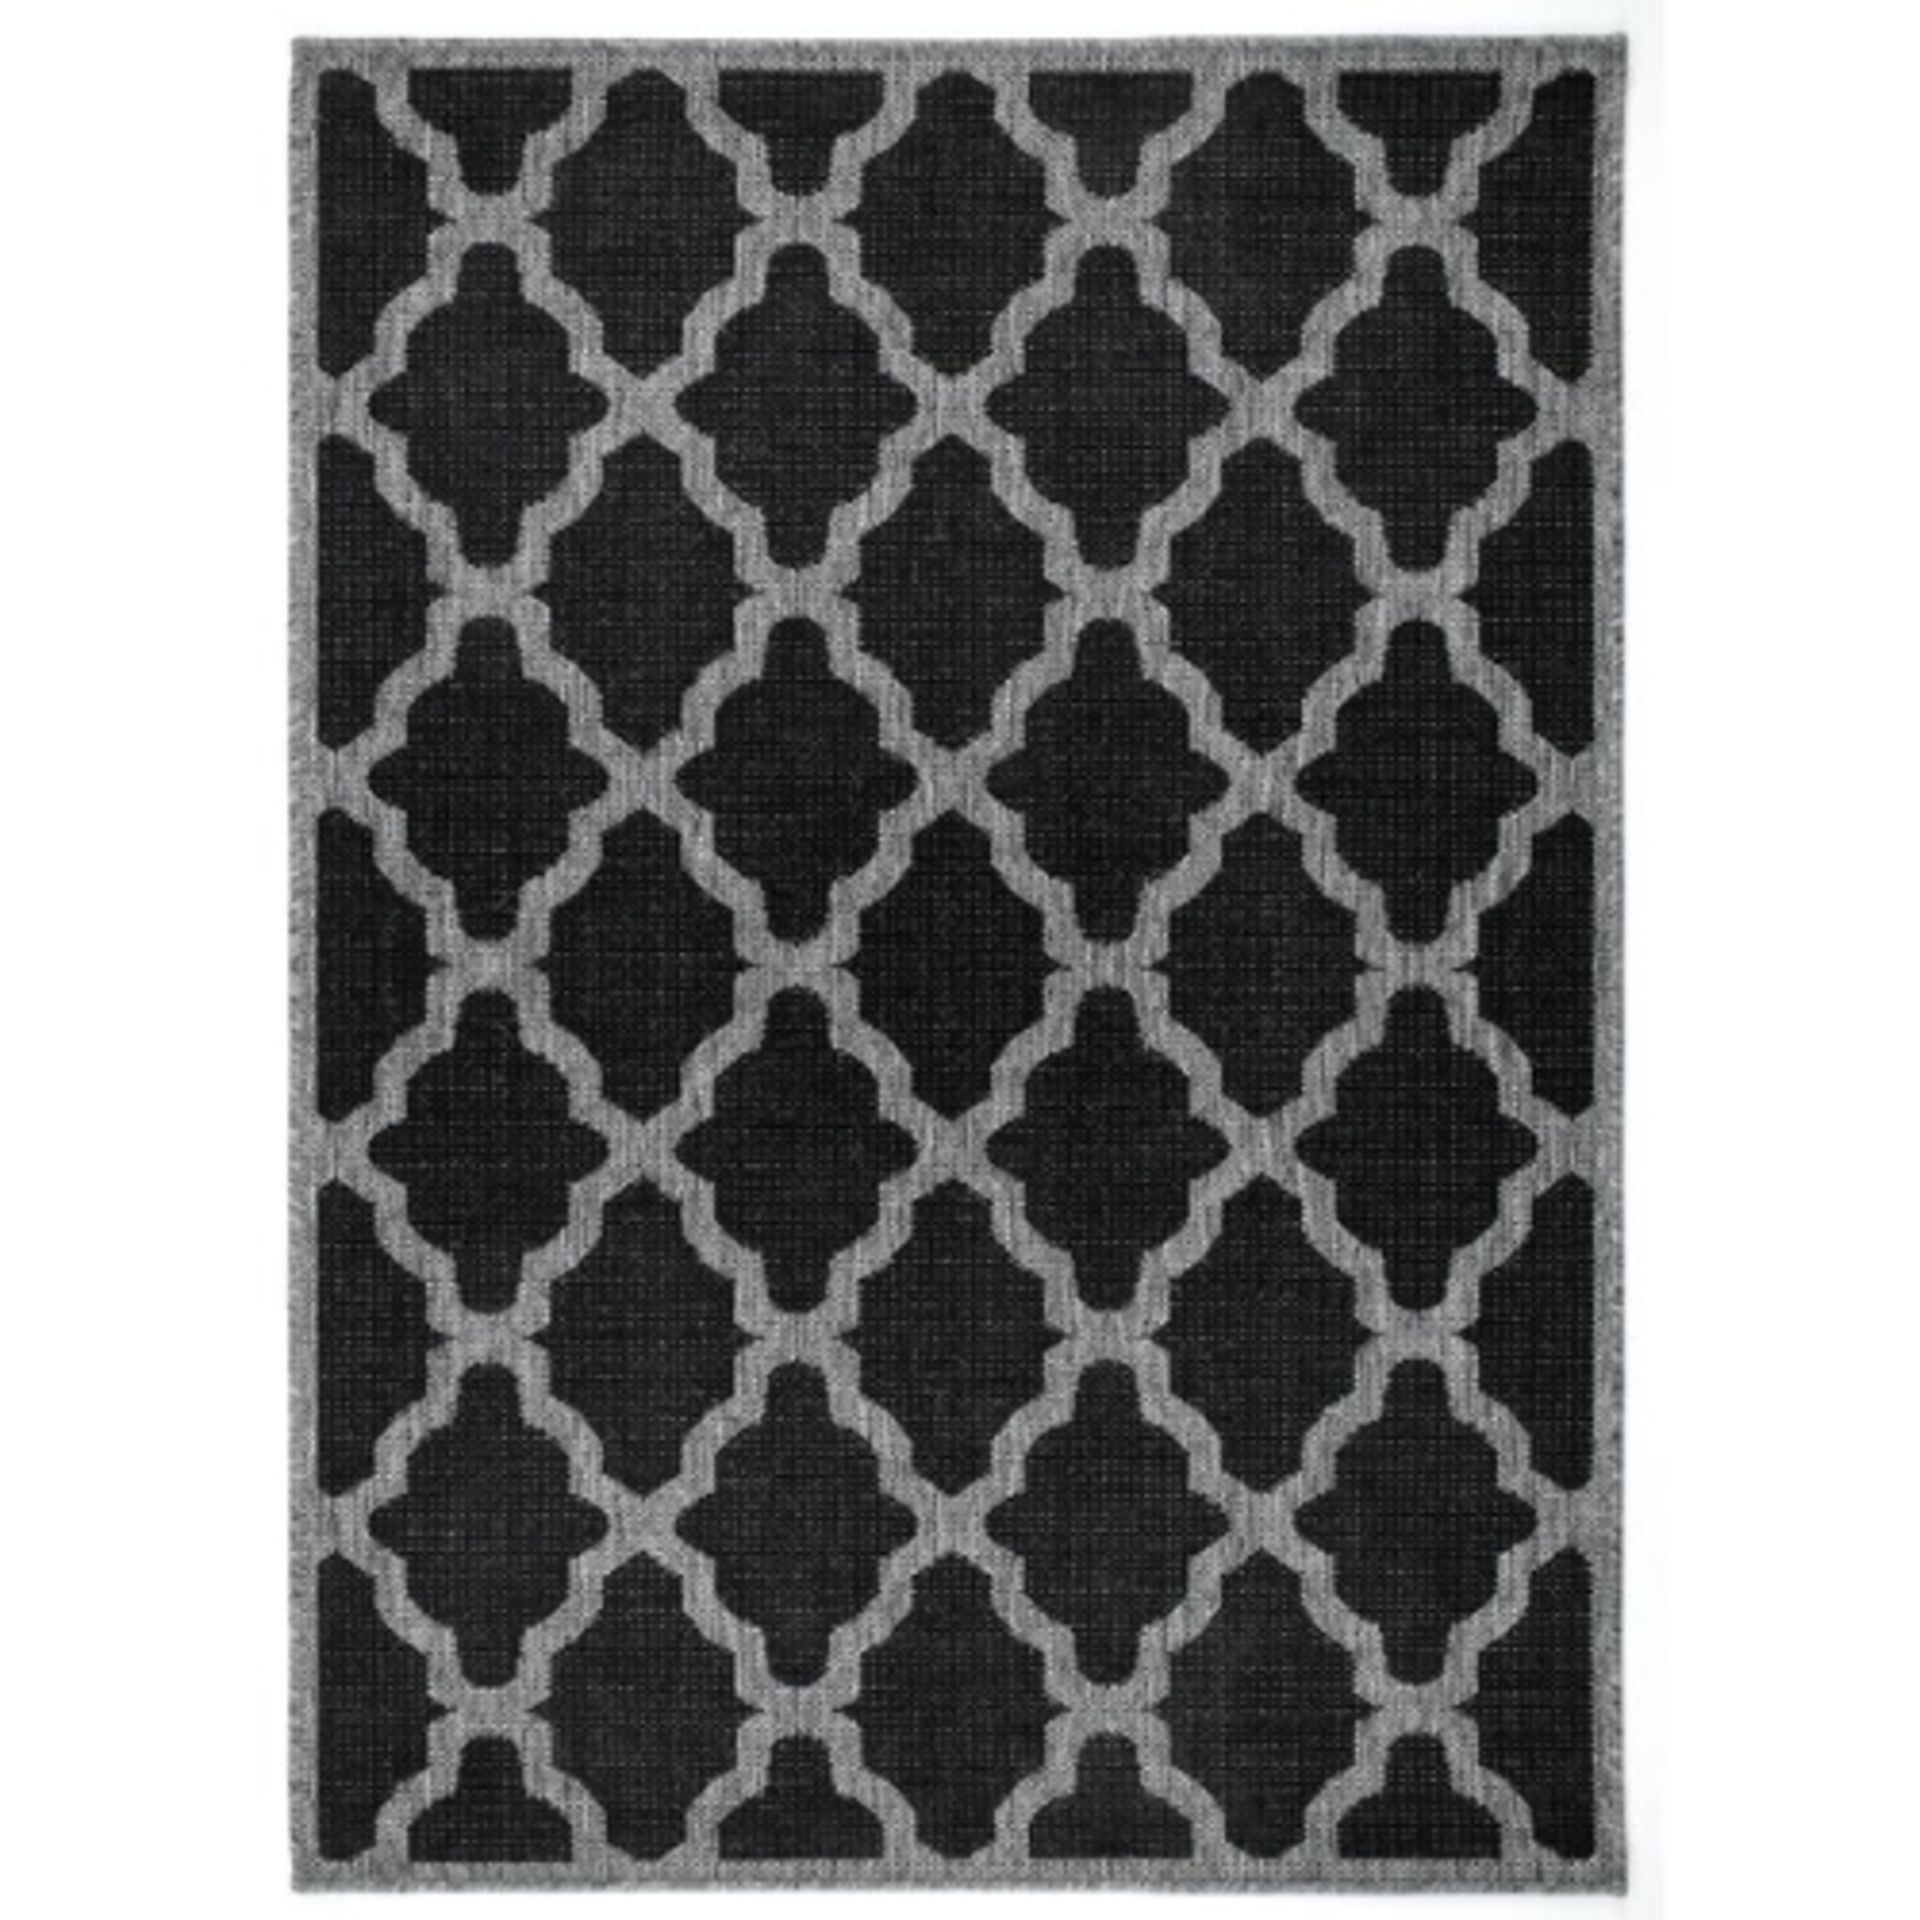 DiPippo Trellis Black Rug by 17 Stories,